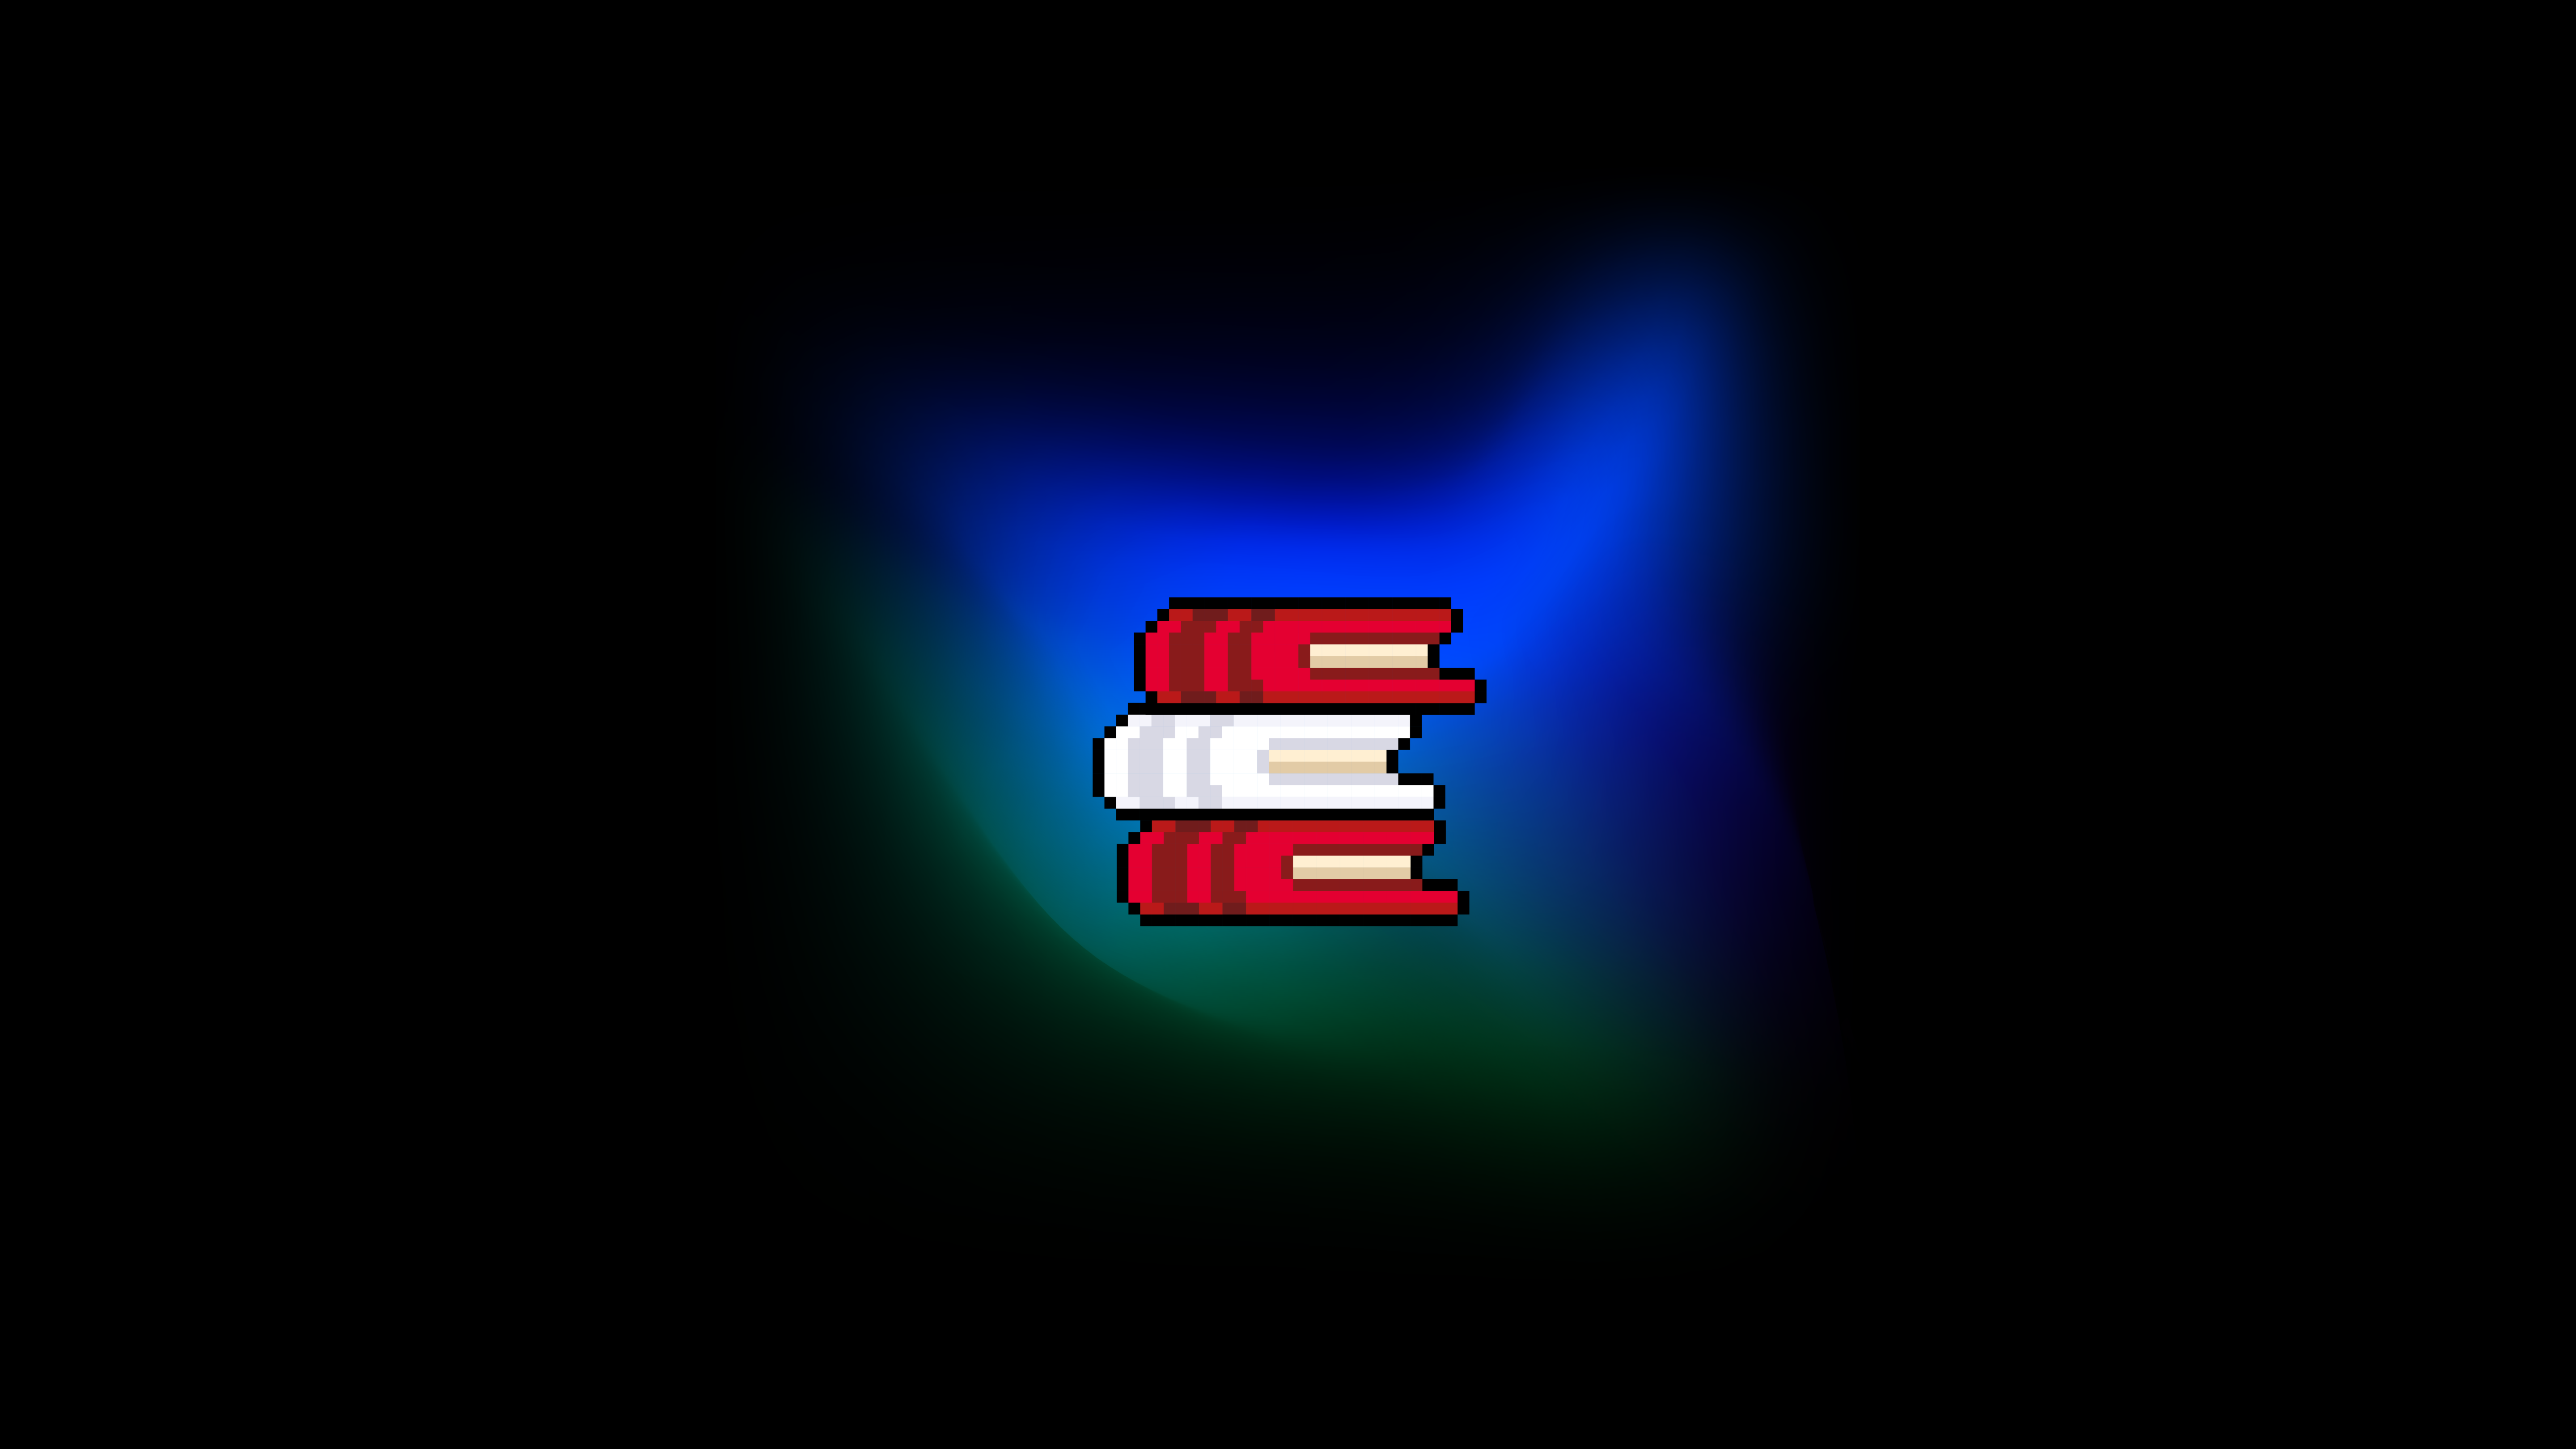 red book emoji in the middle of a blue gradient aurora background.